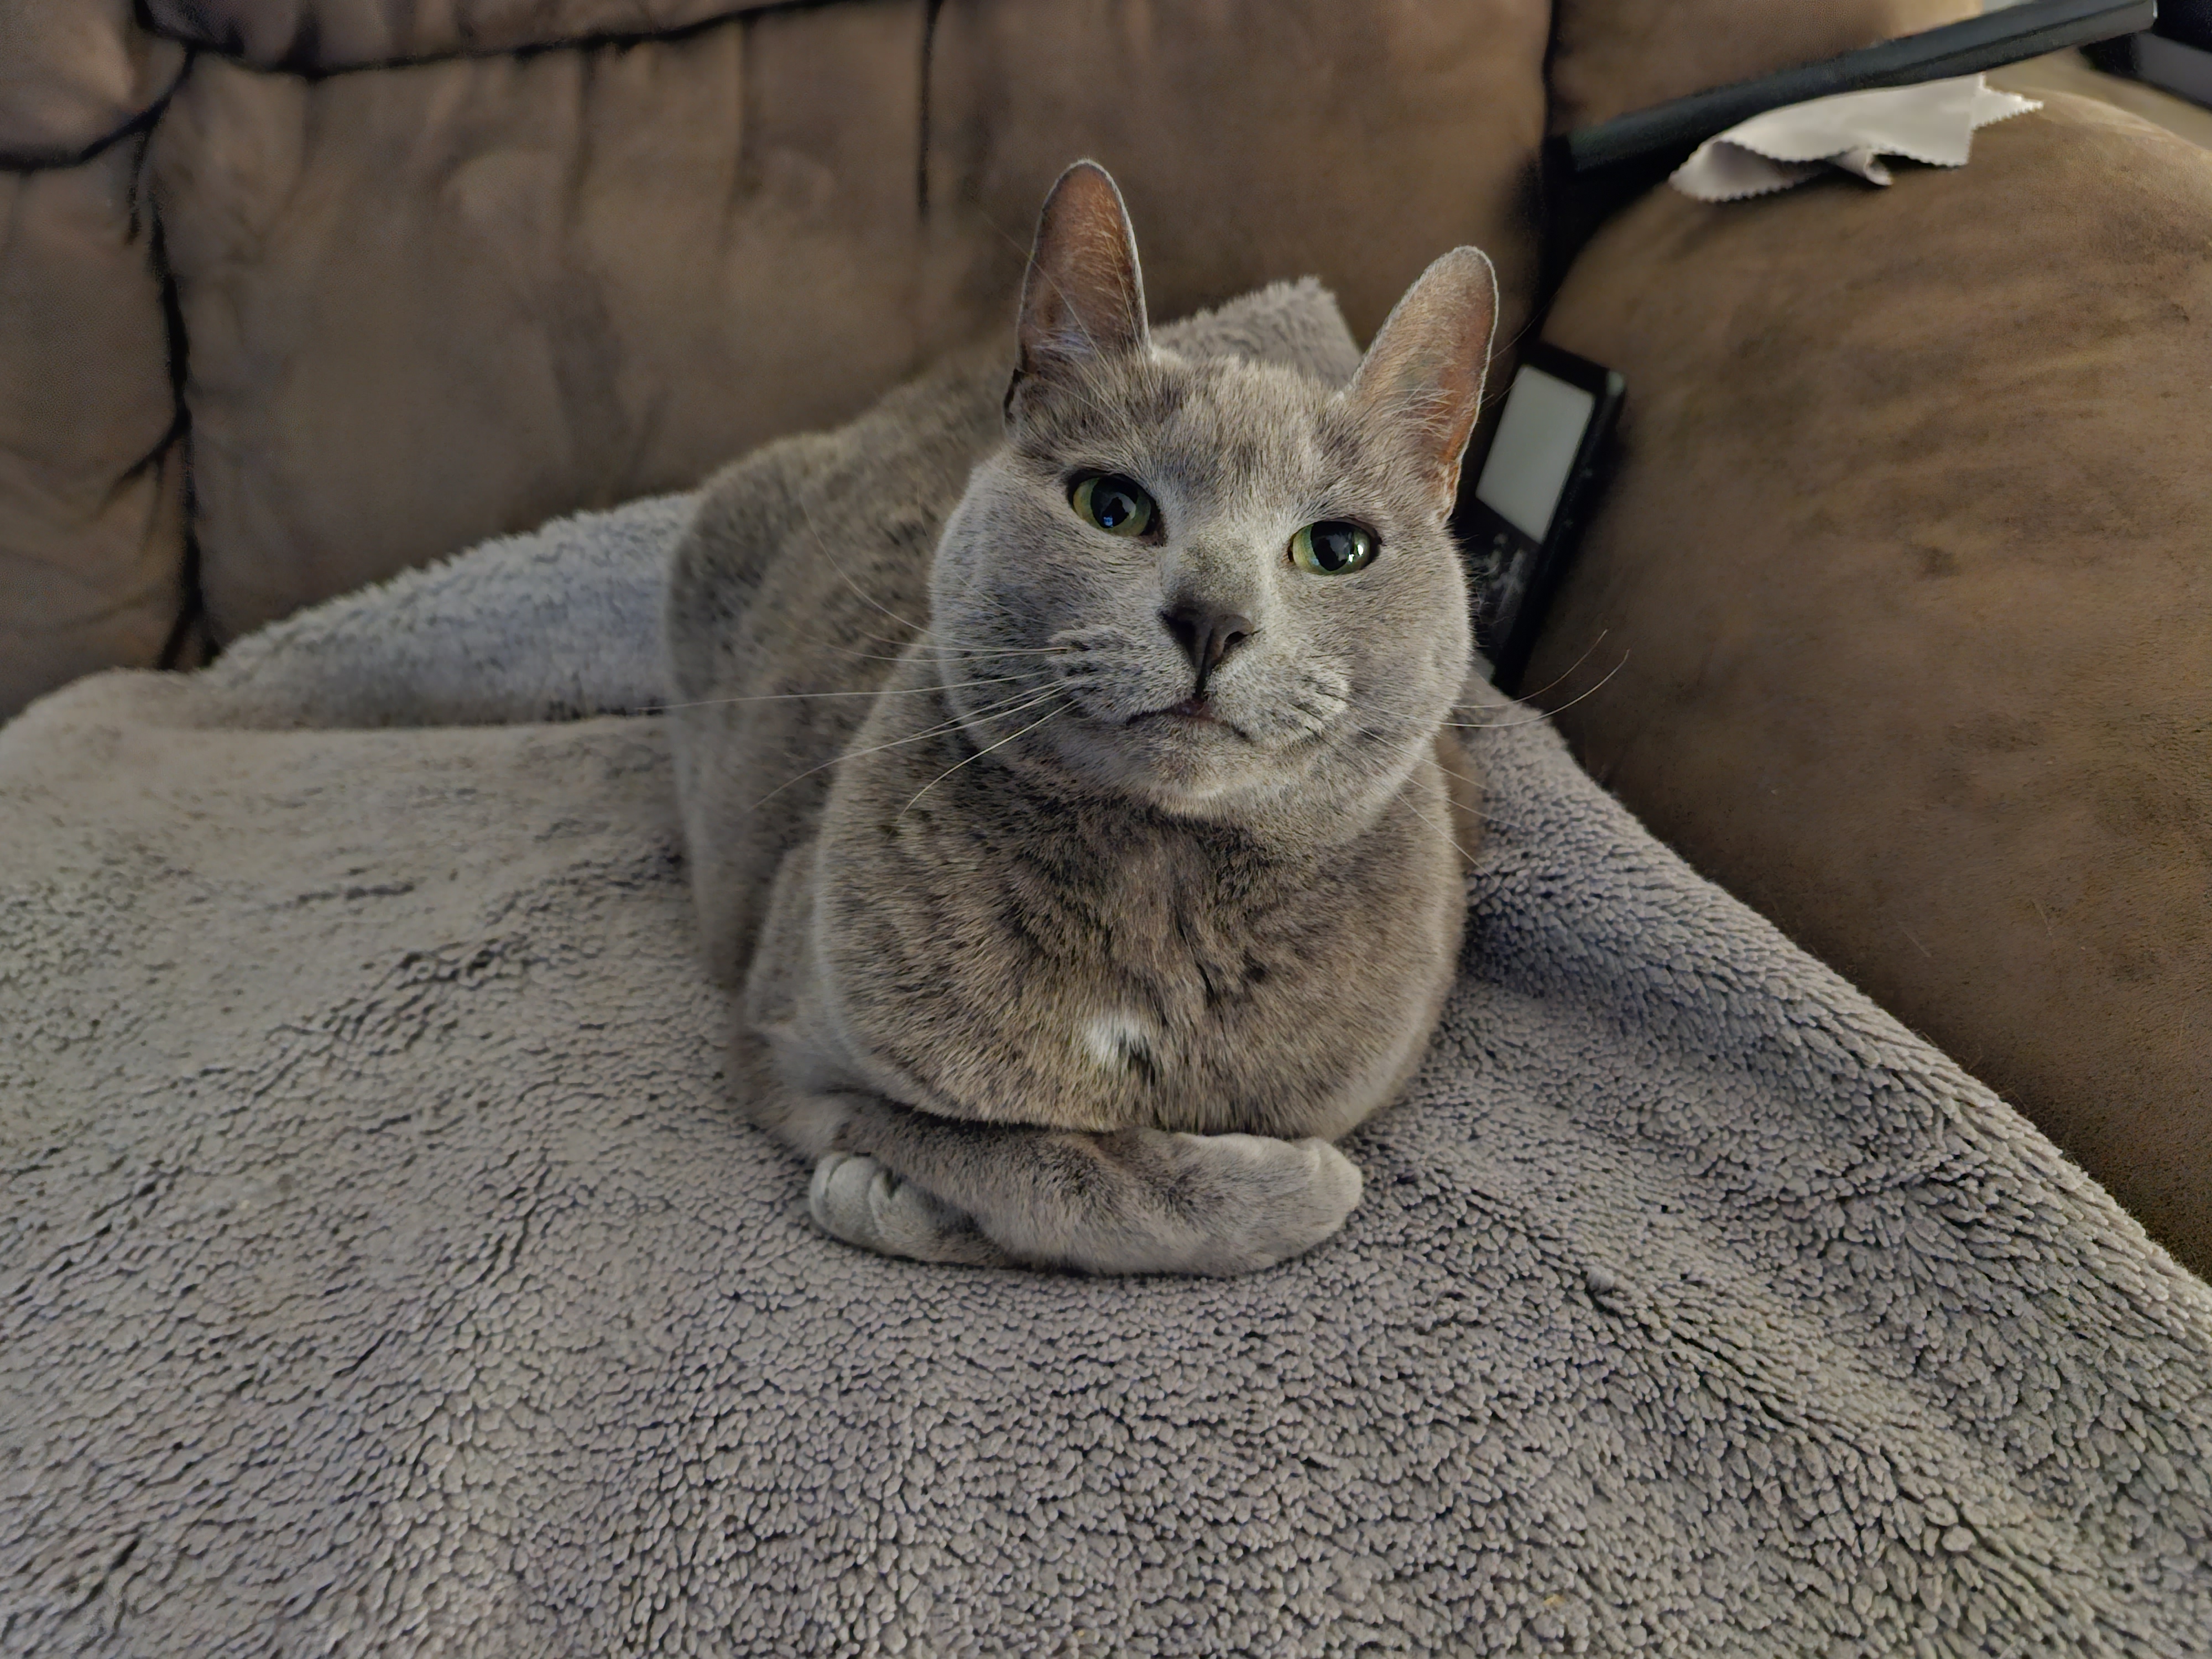 Arya lying on her grey blanket, looking very cute with her front legs crossed like a human would cross their arms.